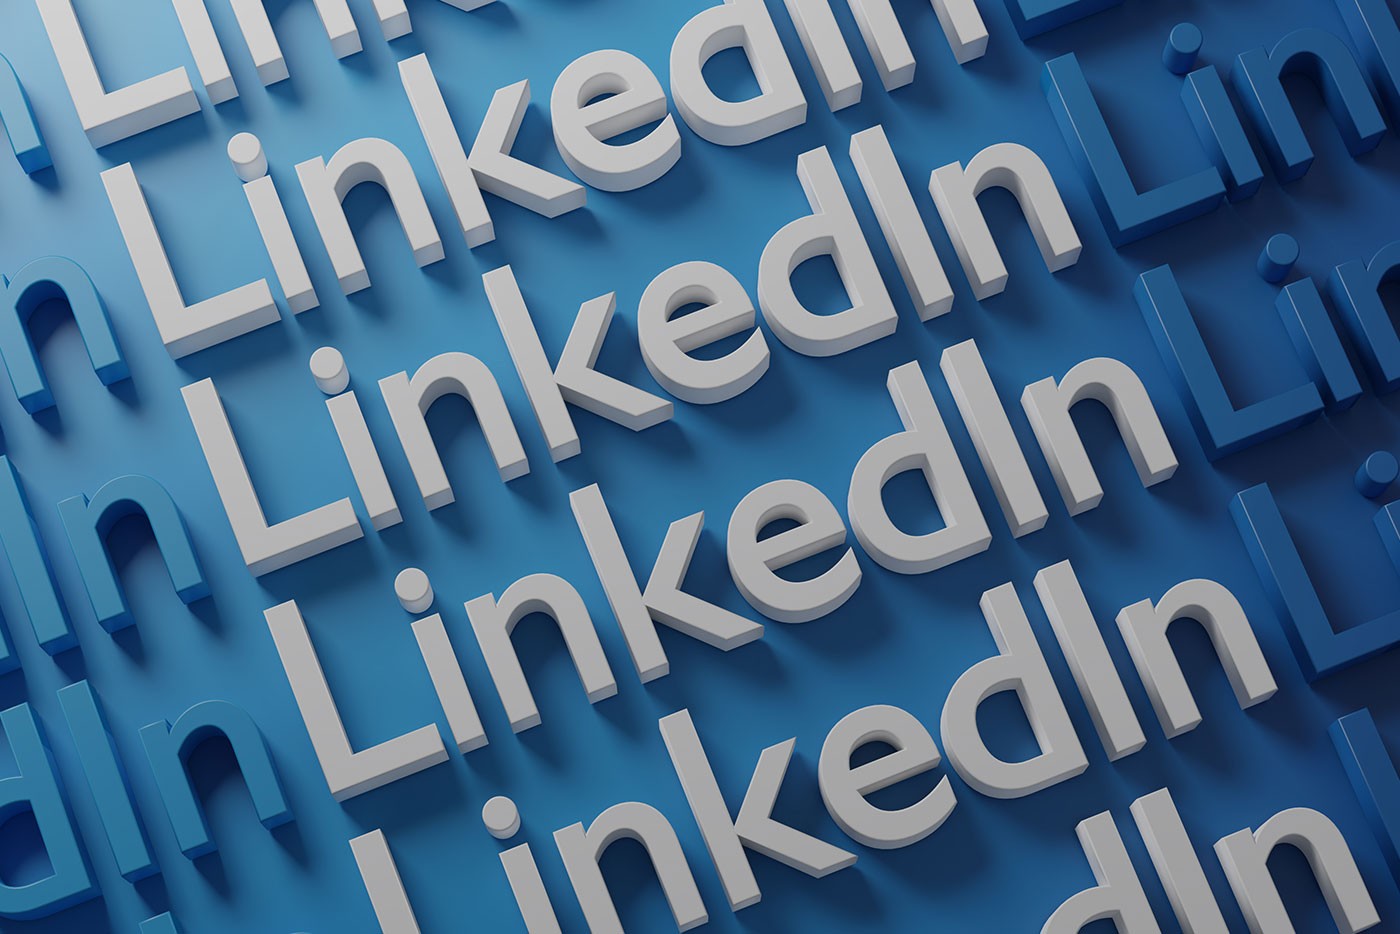 Your Step-by-Step Guide To Advertising On LinkedIn